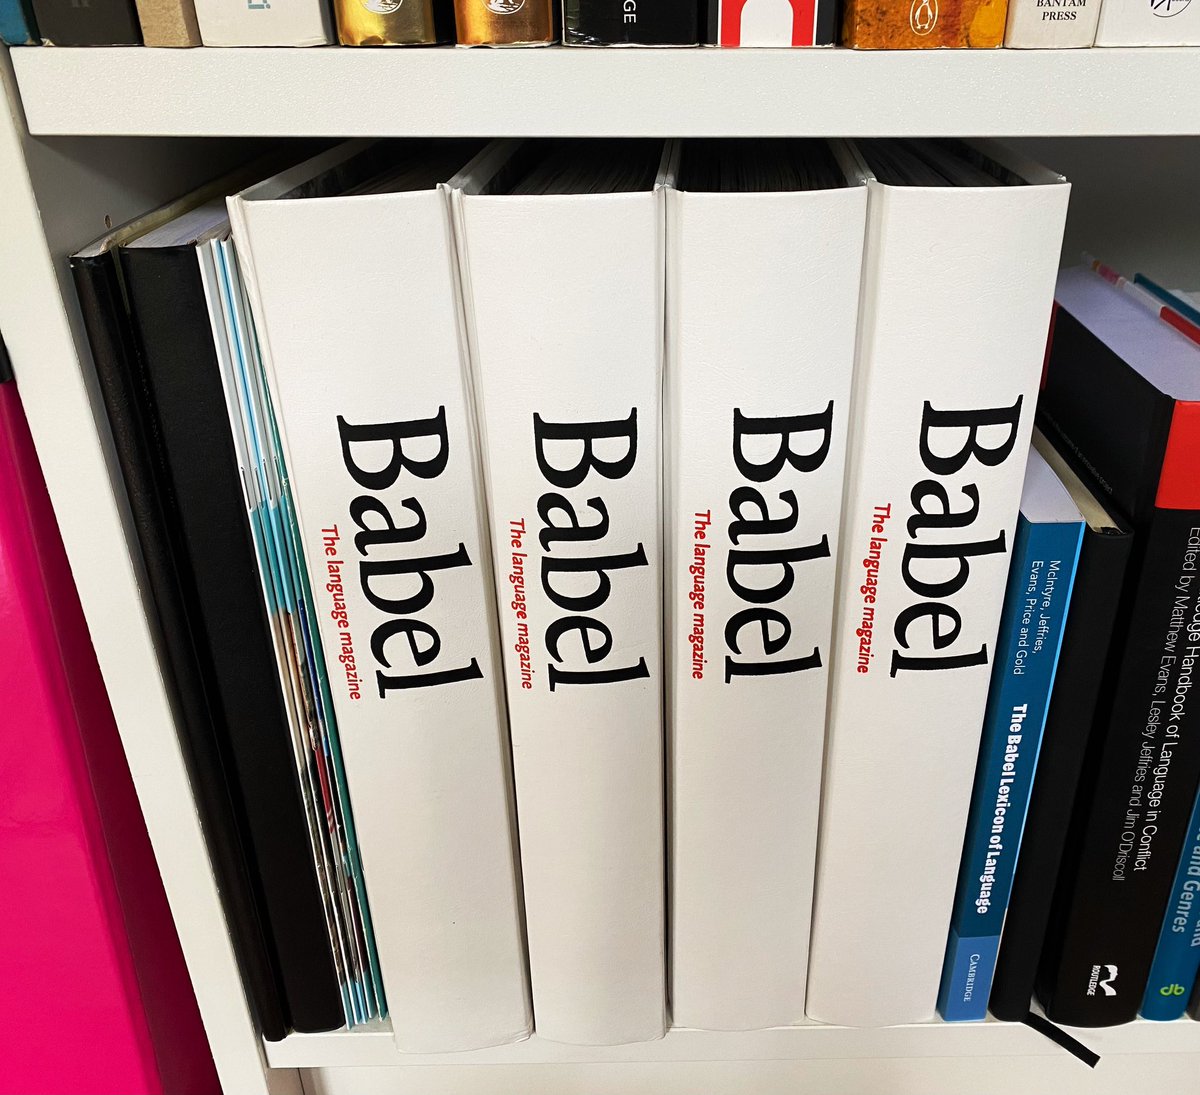 📚 Nice & tidy! Keep your Babels neat with Babel binders 🛒 Available at babelzine.co.uk/back-issues